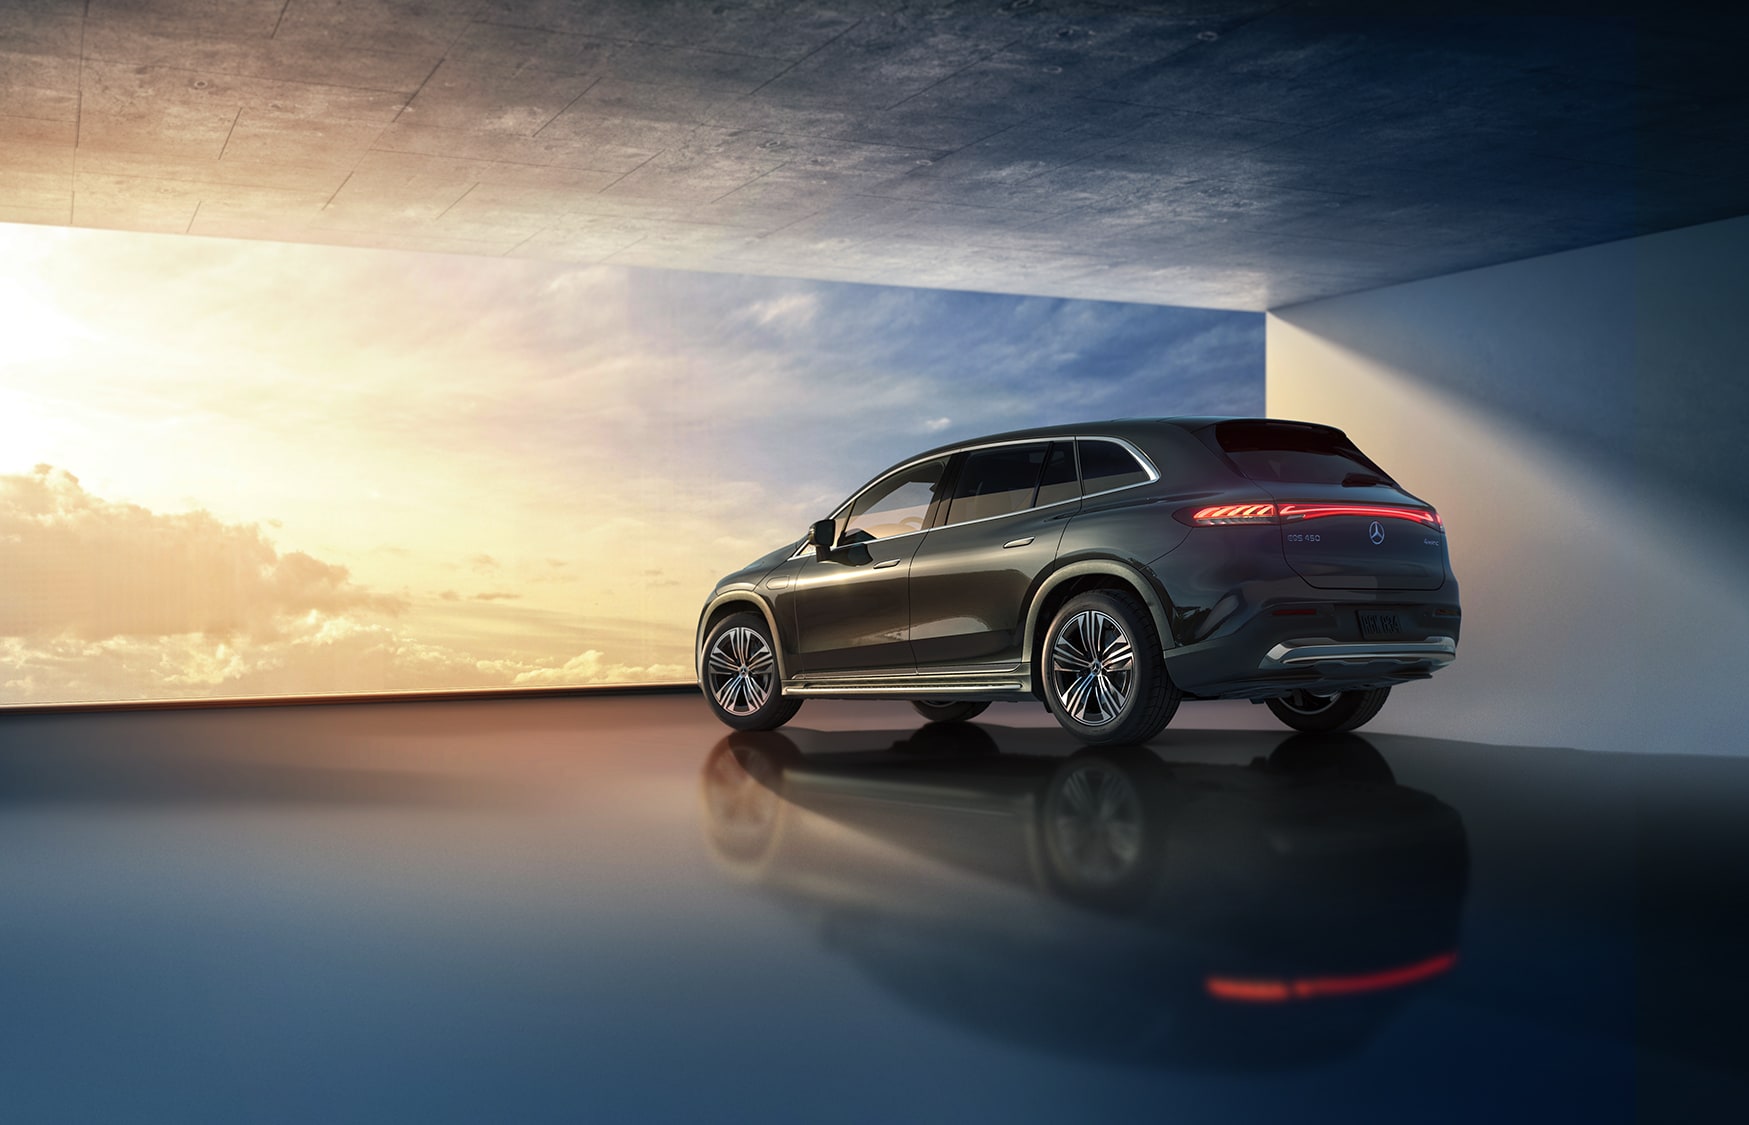  The 2022 Mercedes-Benz EQS SUV is a luxury all-wheel drive 4MATIC® SUV that joins the brand's lineup with a sleek design, luxurious interior, and innovative features like Wireless Charging.